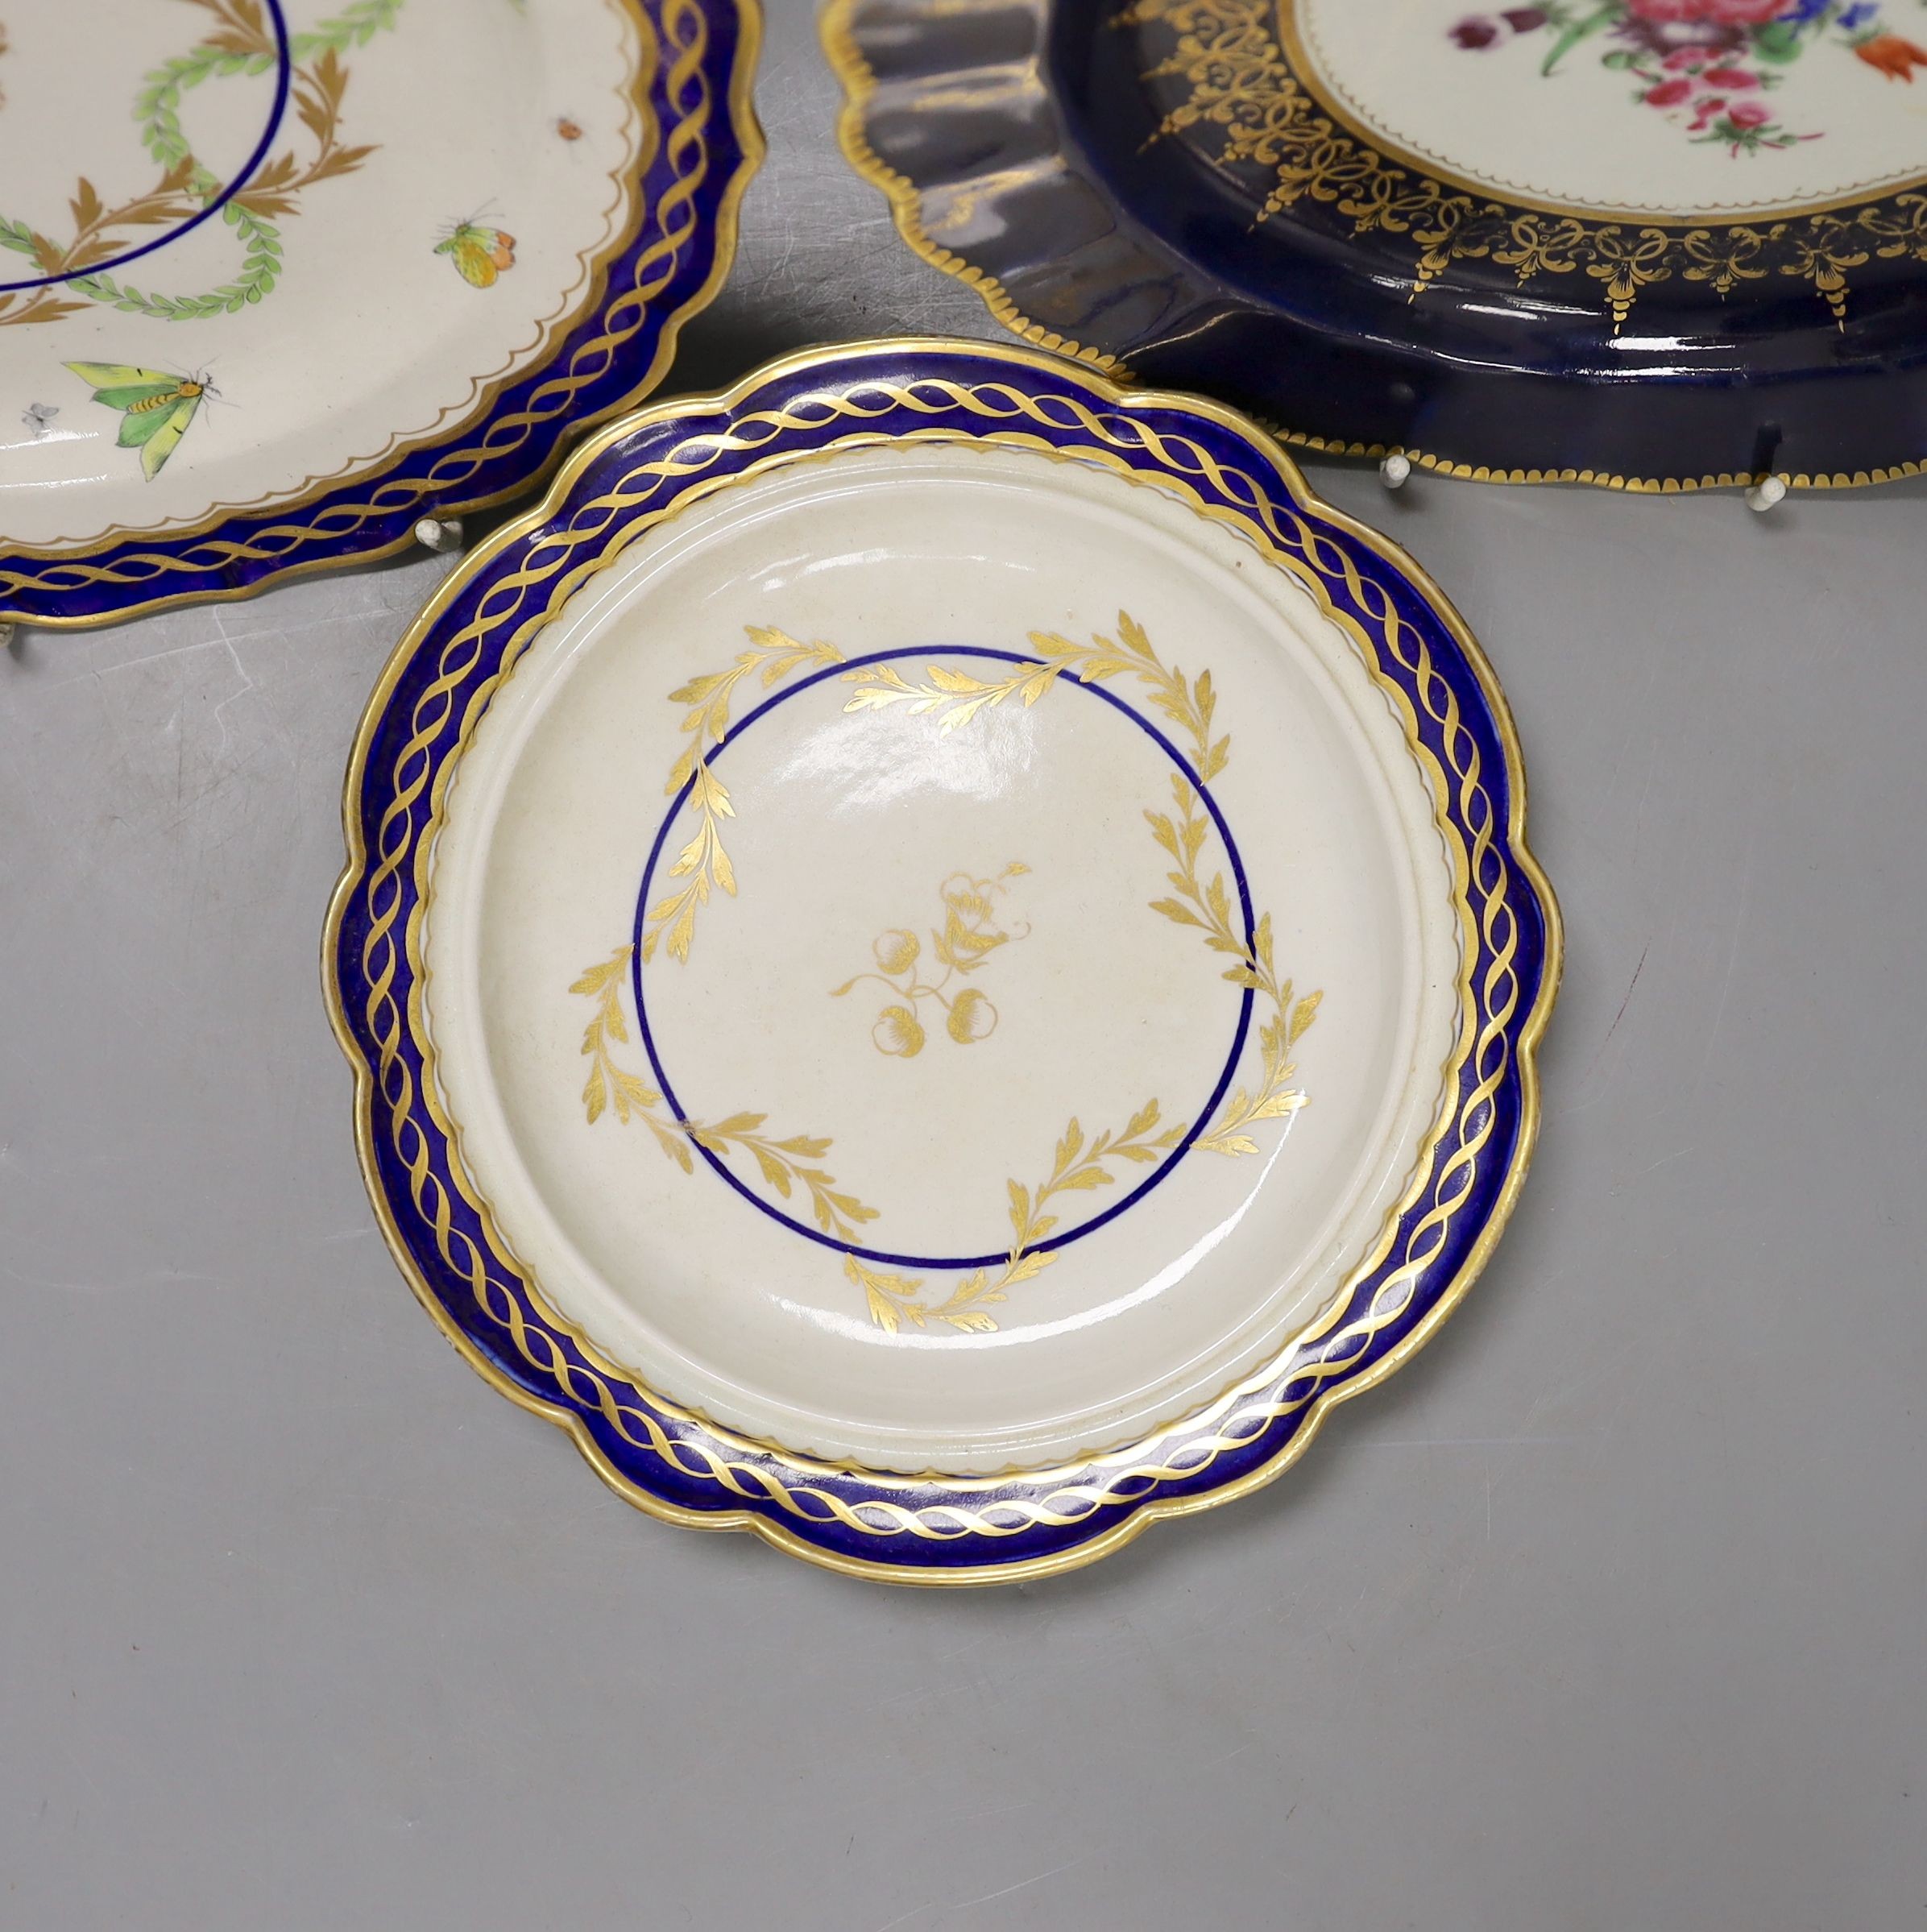 Three Worcester plates having blue border, one with elaborated gilding enclosing a bouquet of flowers, two plates both with a star shaped foliate design in the centre, c.1775, largest 21.5 cm